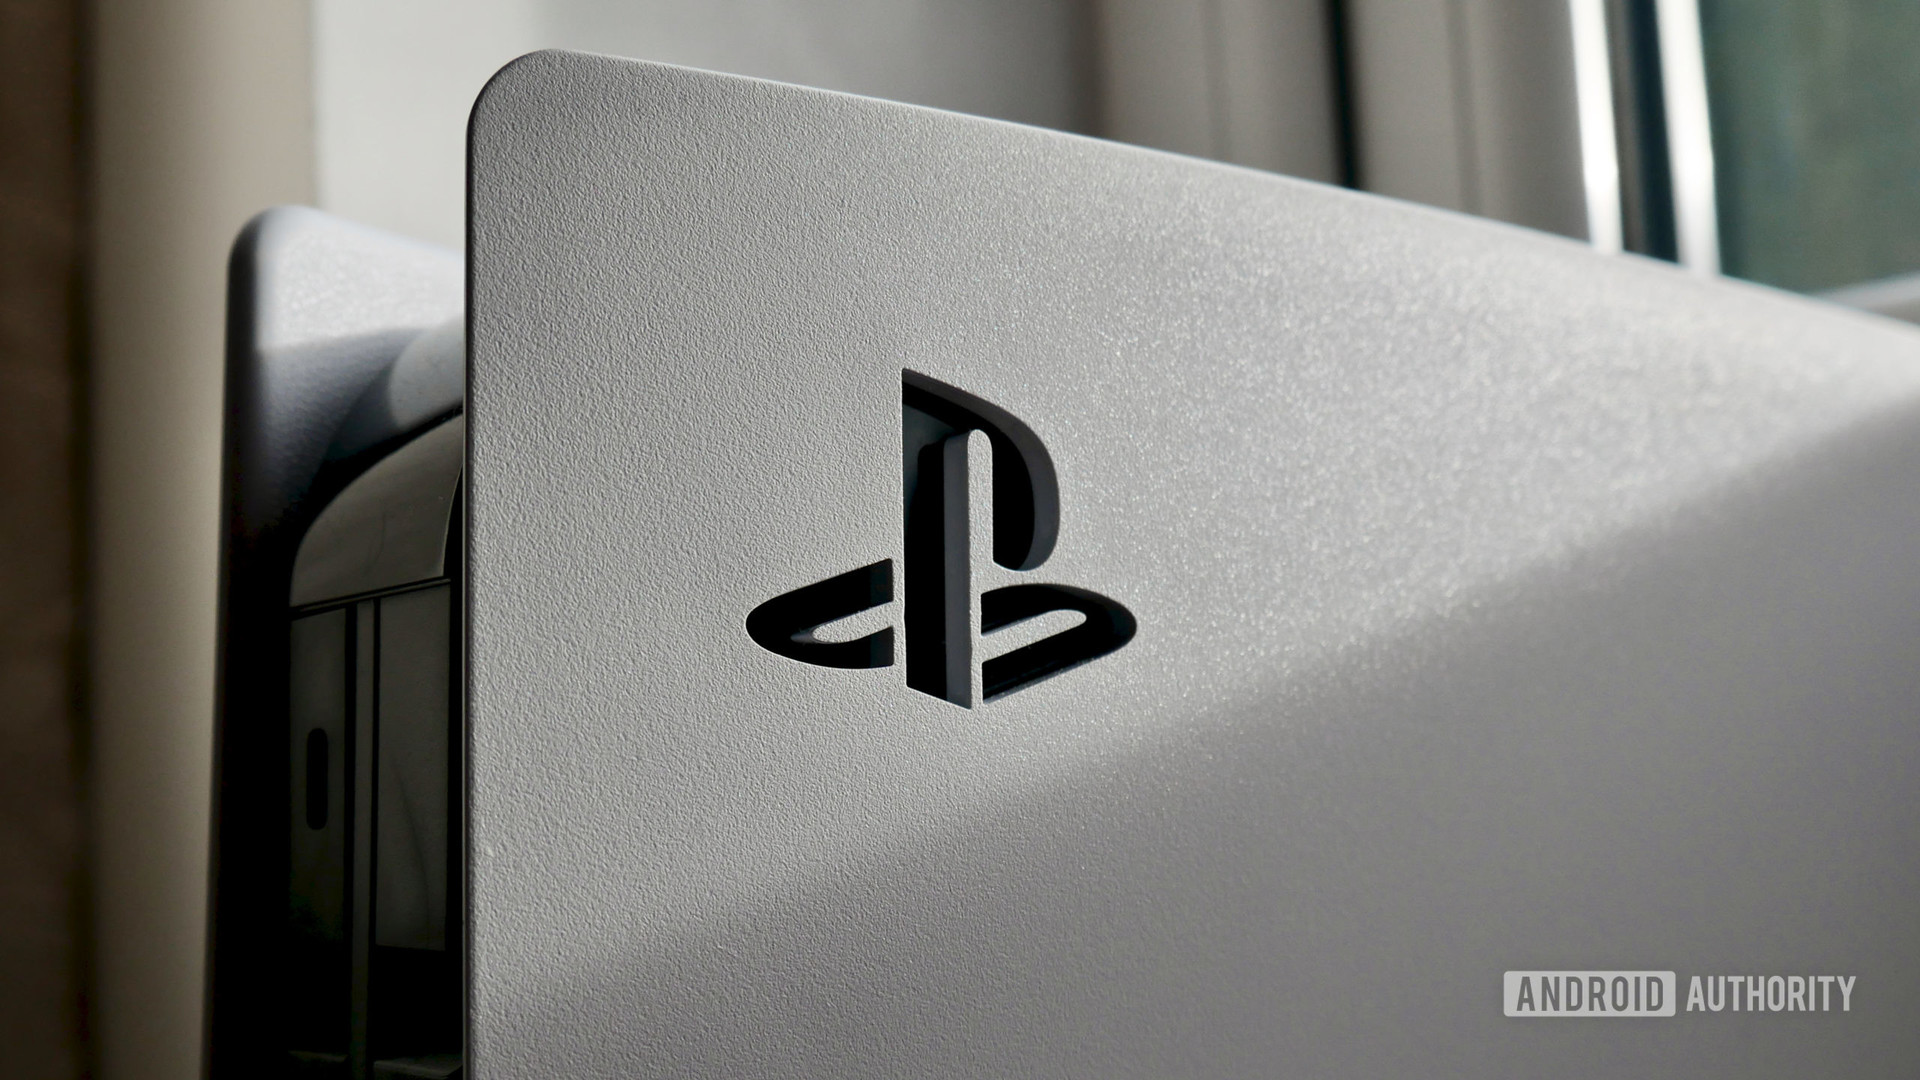 PS5 buyer's guide: All you need to know about Sony's PlayStation 5